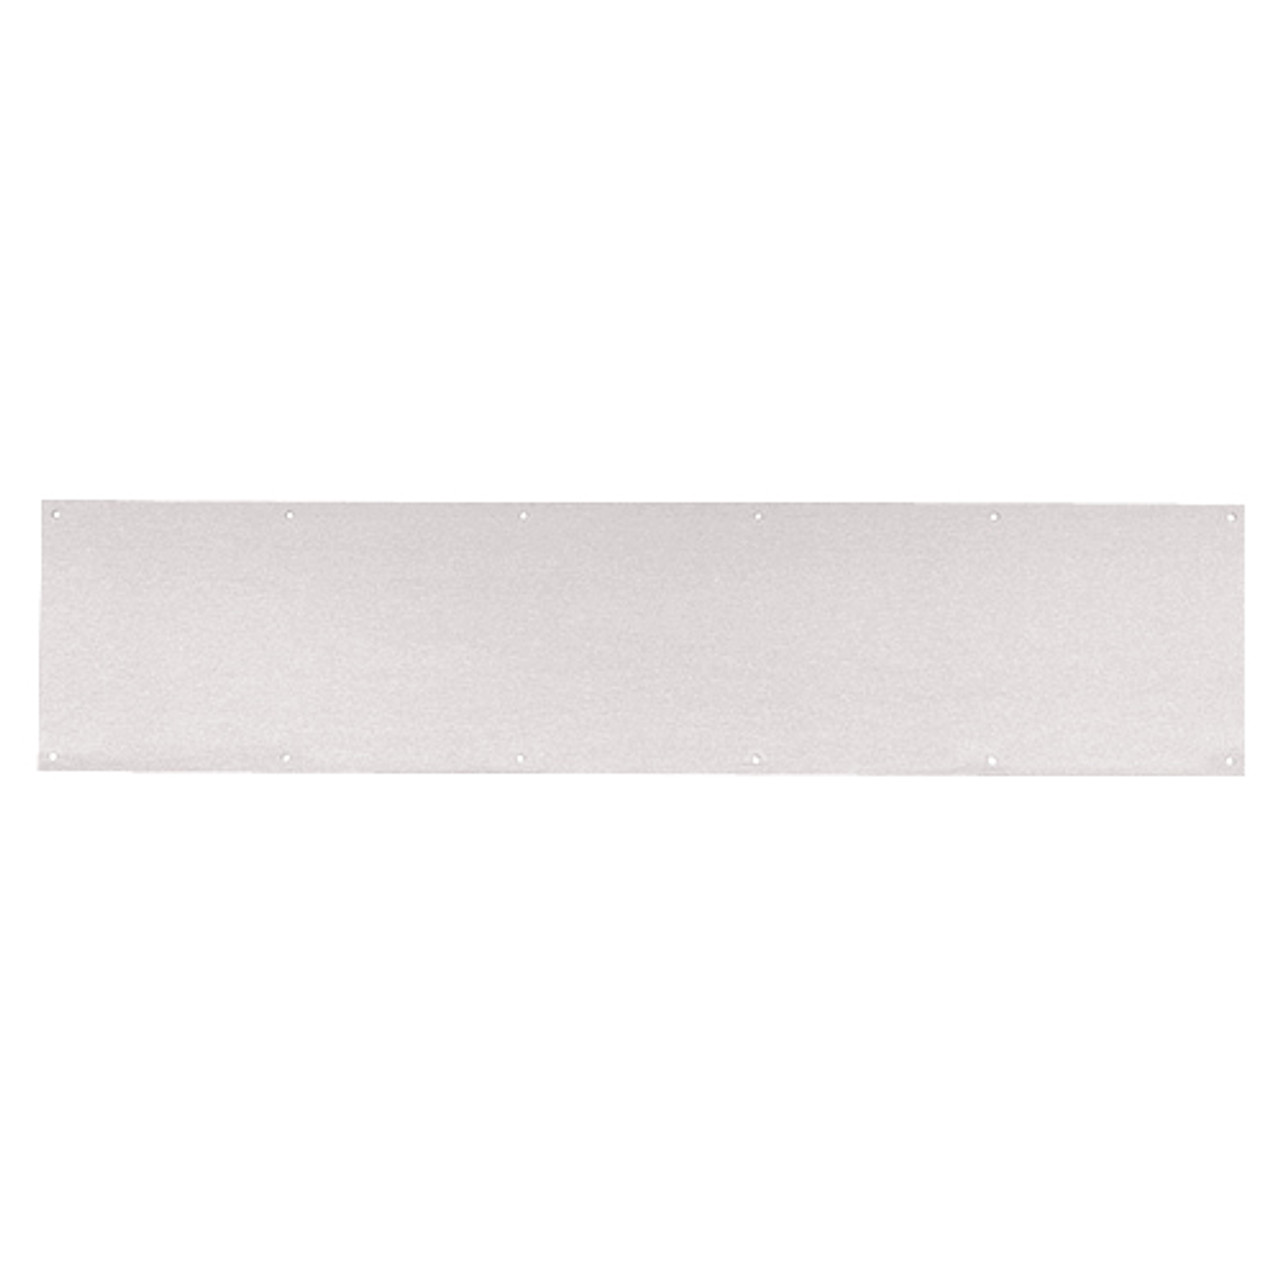 8400-US32-12x40-B-CS Ives 8400 Series Protection Plate in Bright Stainless Steel